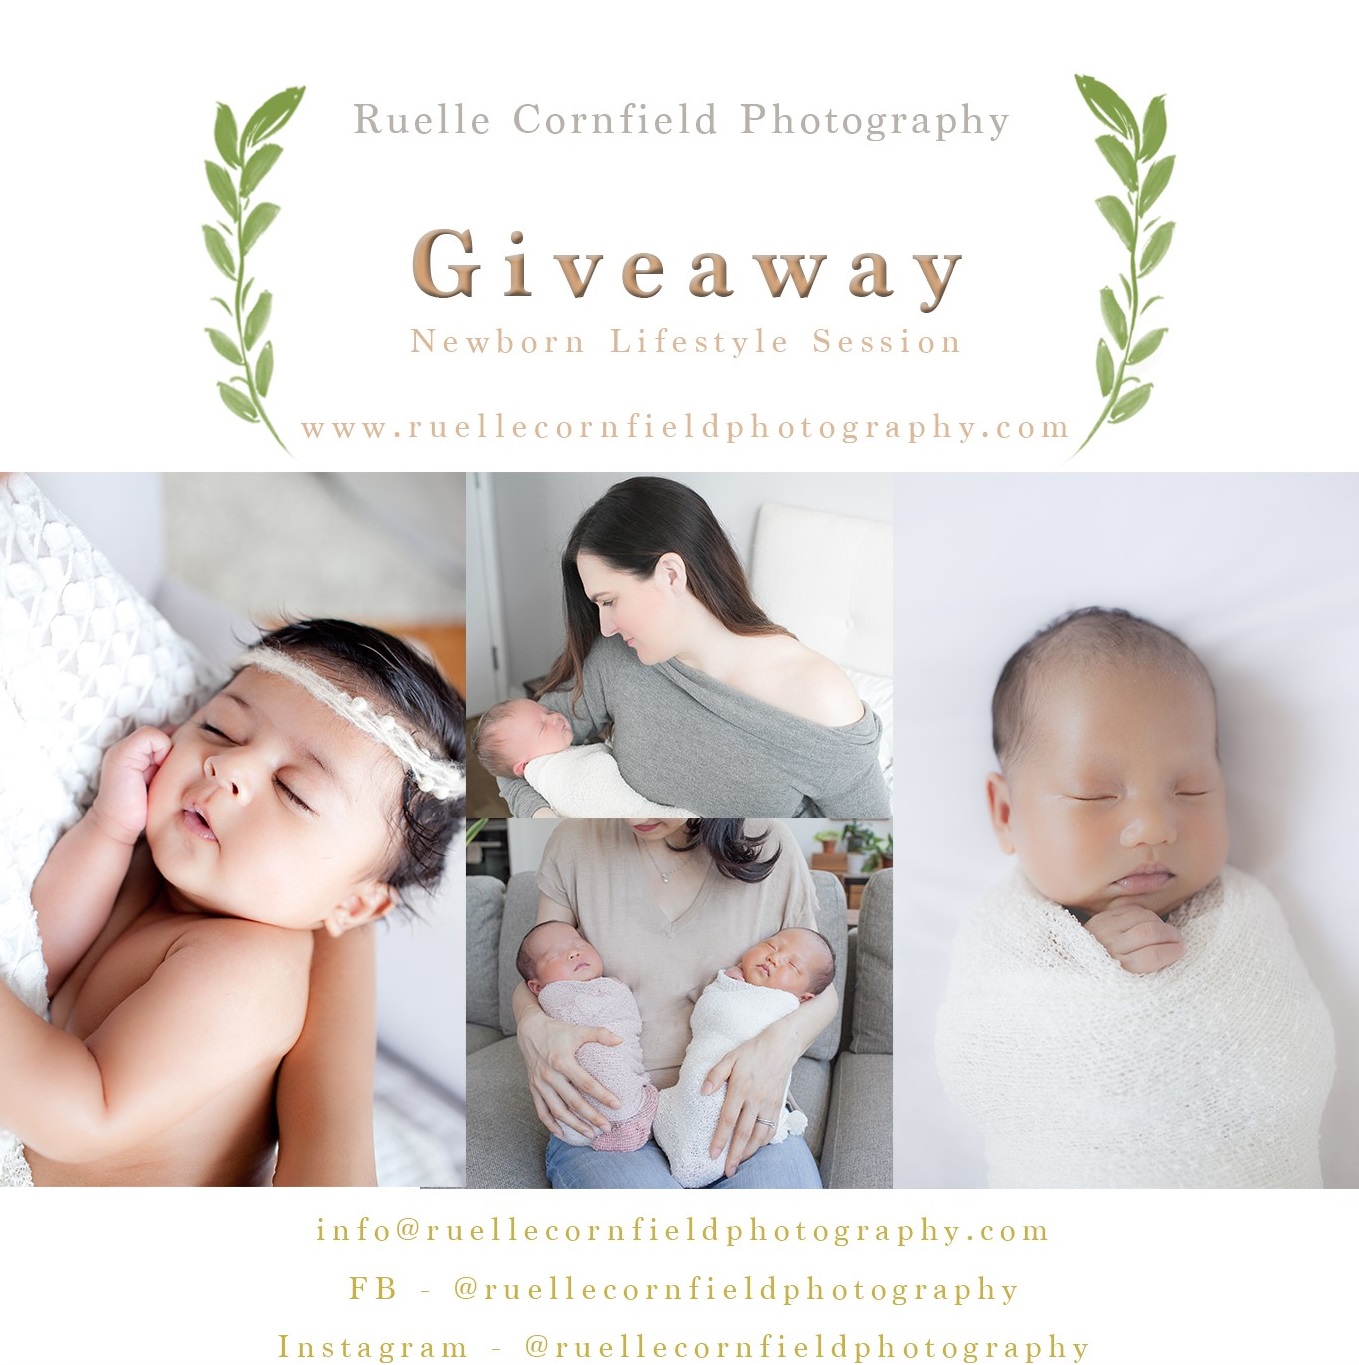 Win a Newborn Lifestyle Photoshoot with Ruelle Cornfield Photography